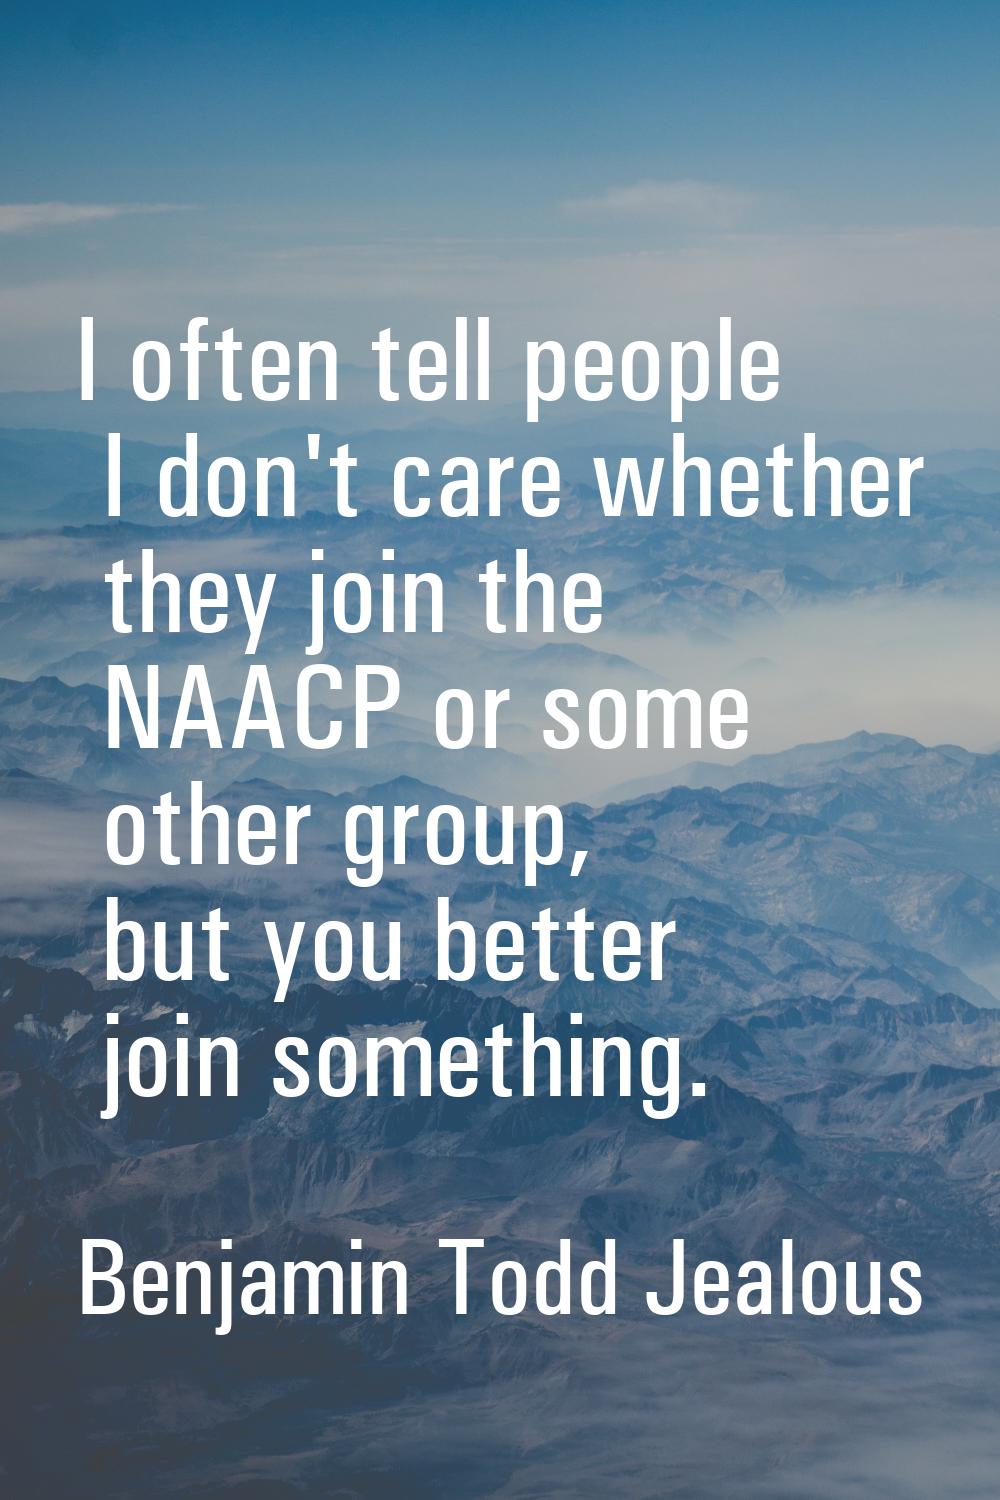 I often tell people I don't care whether they join the NAACP or some other group, but you better jo